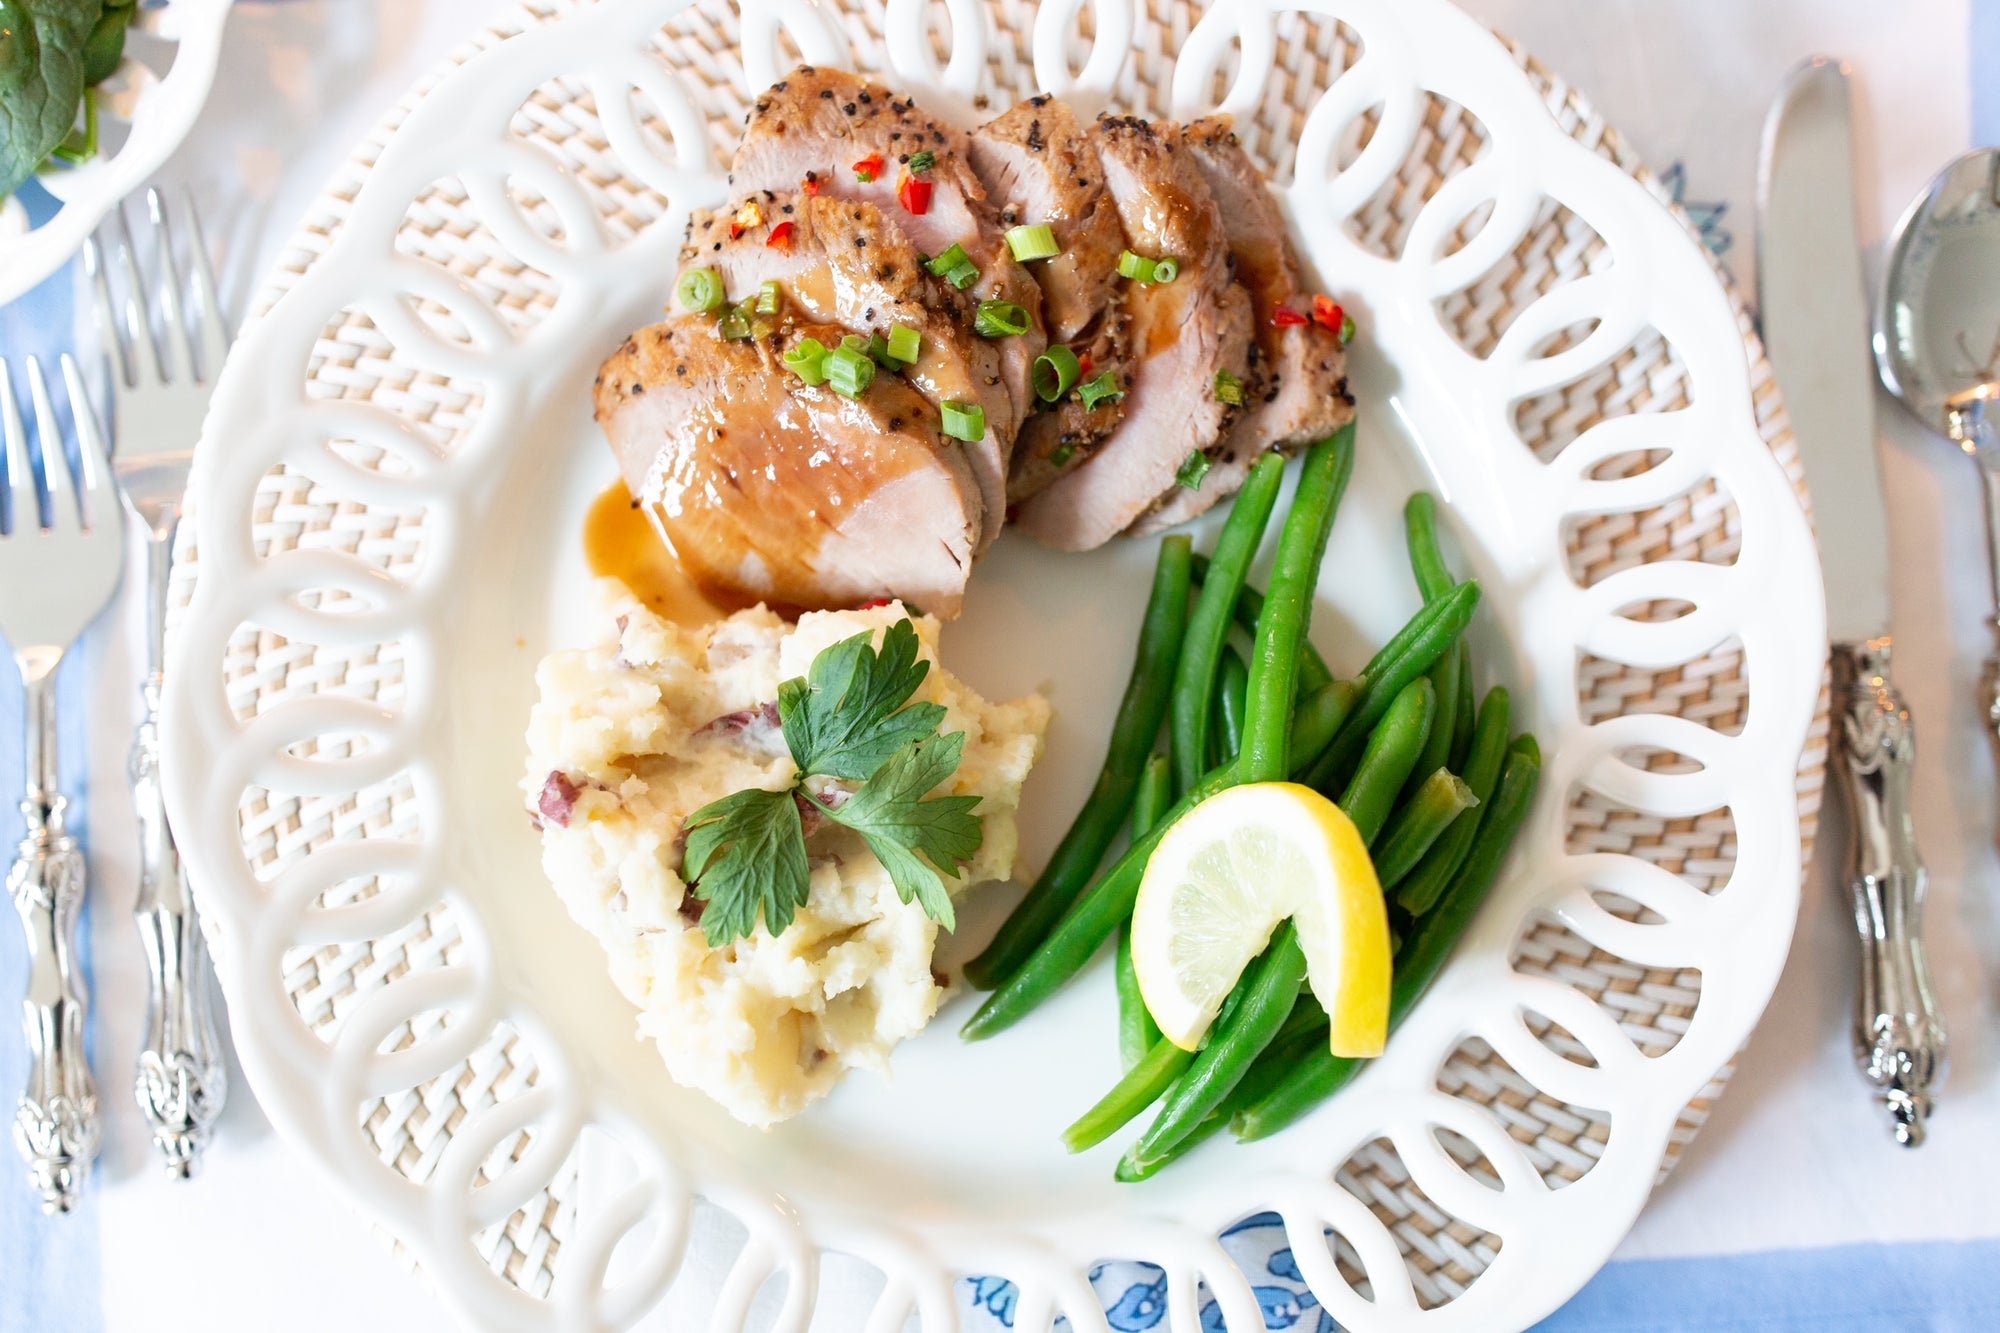 Instead of Flowers - Build a Meal - Roasted Pork Tenderloin – Deluxe Entree